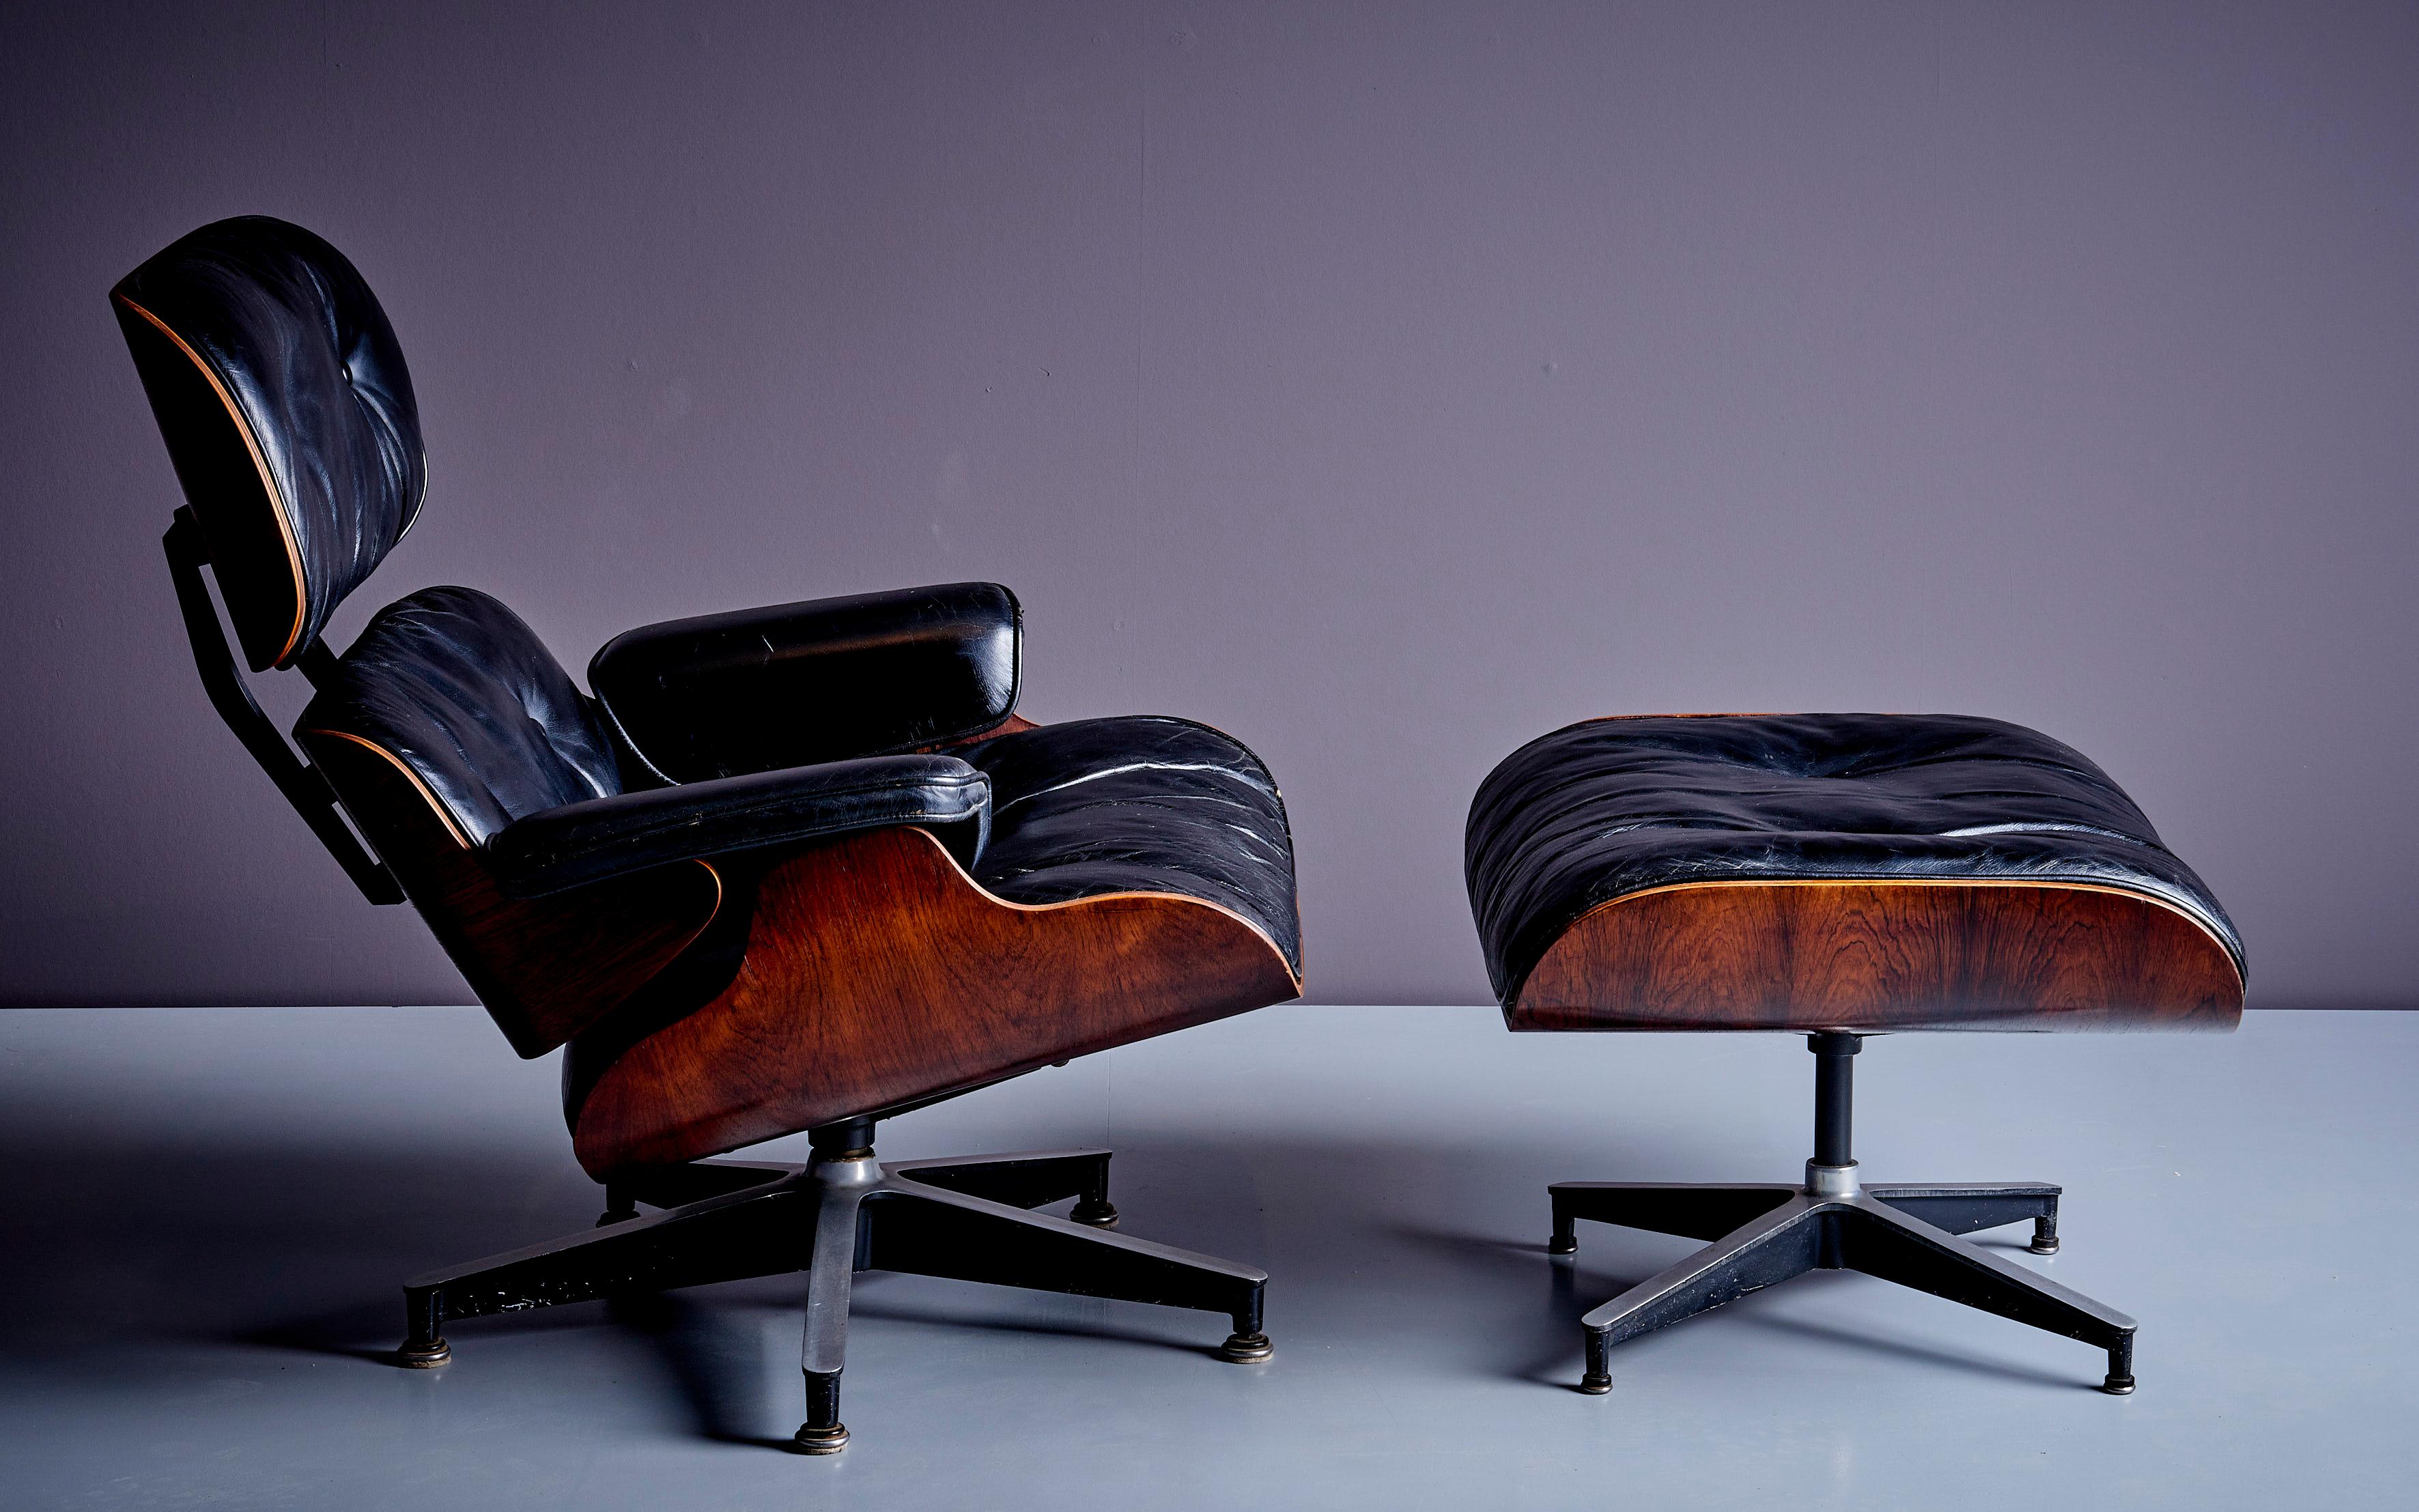 Rare early Charles & Ray Eames Lounge Chair 670 & 671 in an outstanding rosewood with stunning grain in excellent condition. Black Foil label. Original Latex and Down filling in the pillows. The chairs and Ottoman are matched. A true collectors